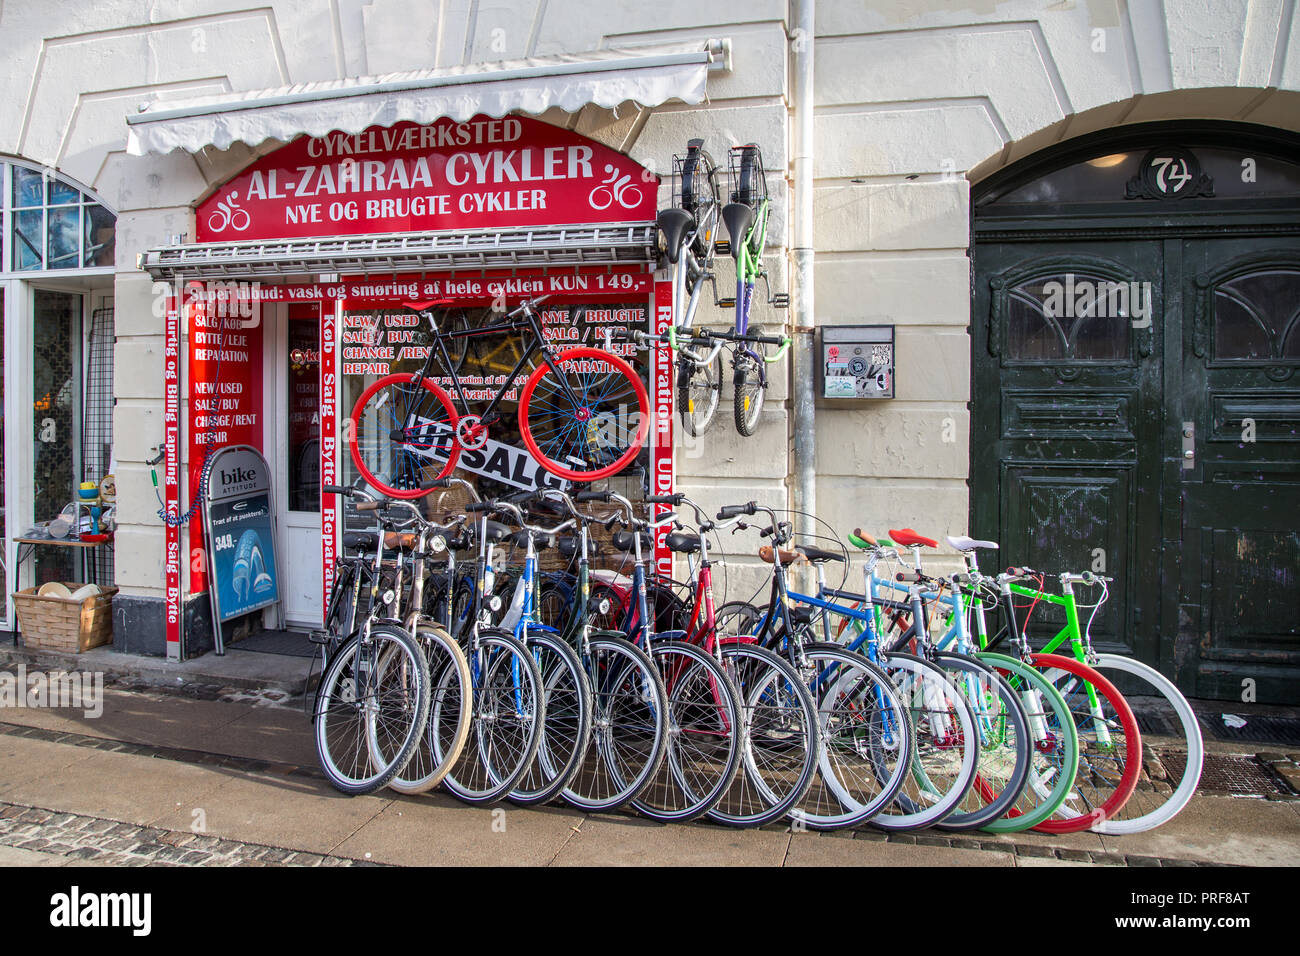 Copenhagen Bicycle Shop High Resolution Stock Photography and Images - Alamy